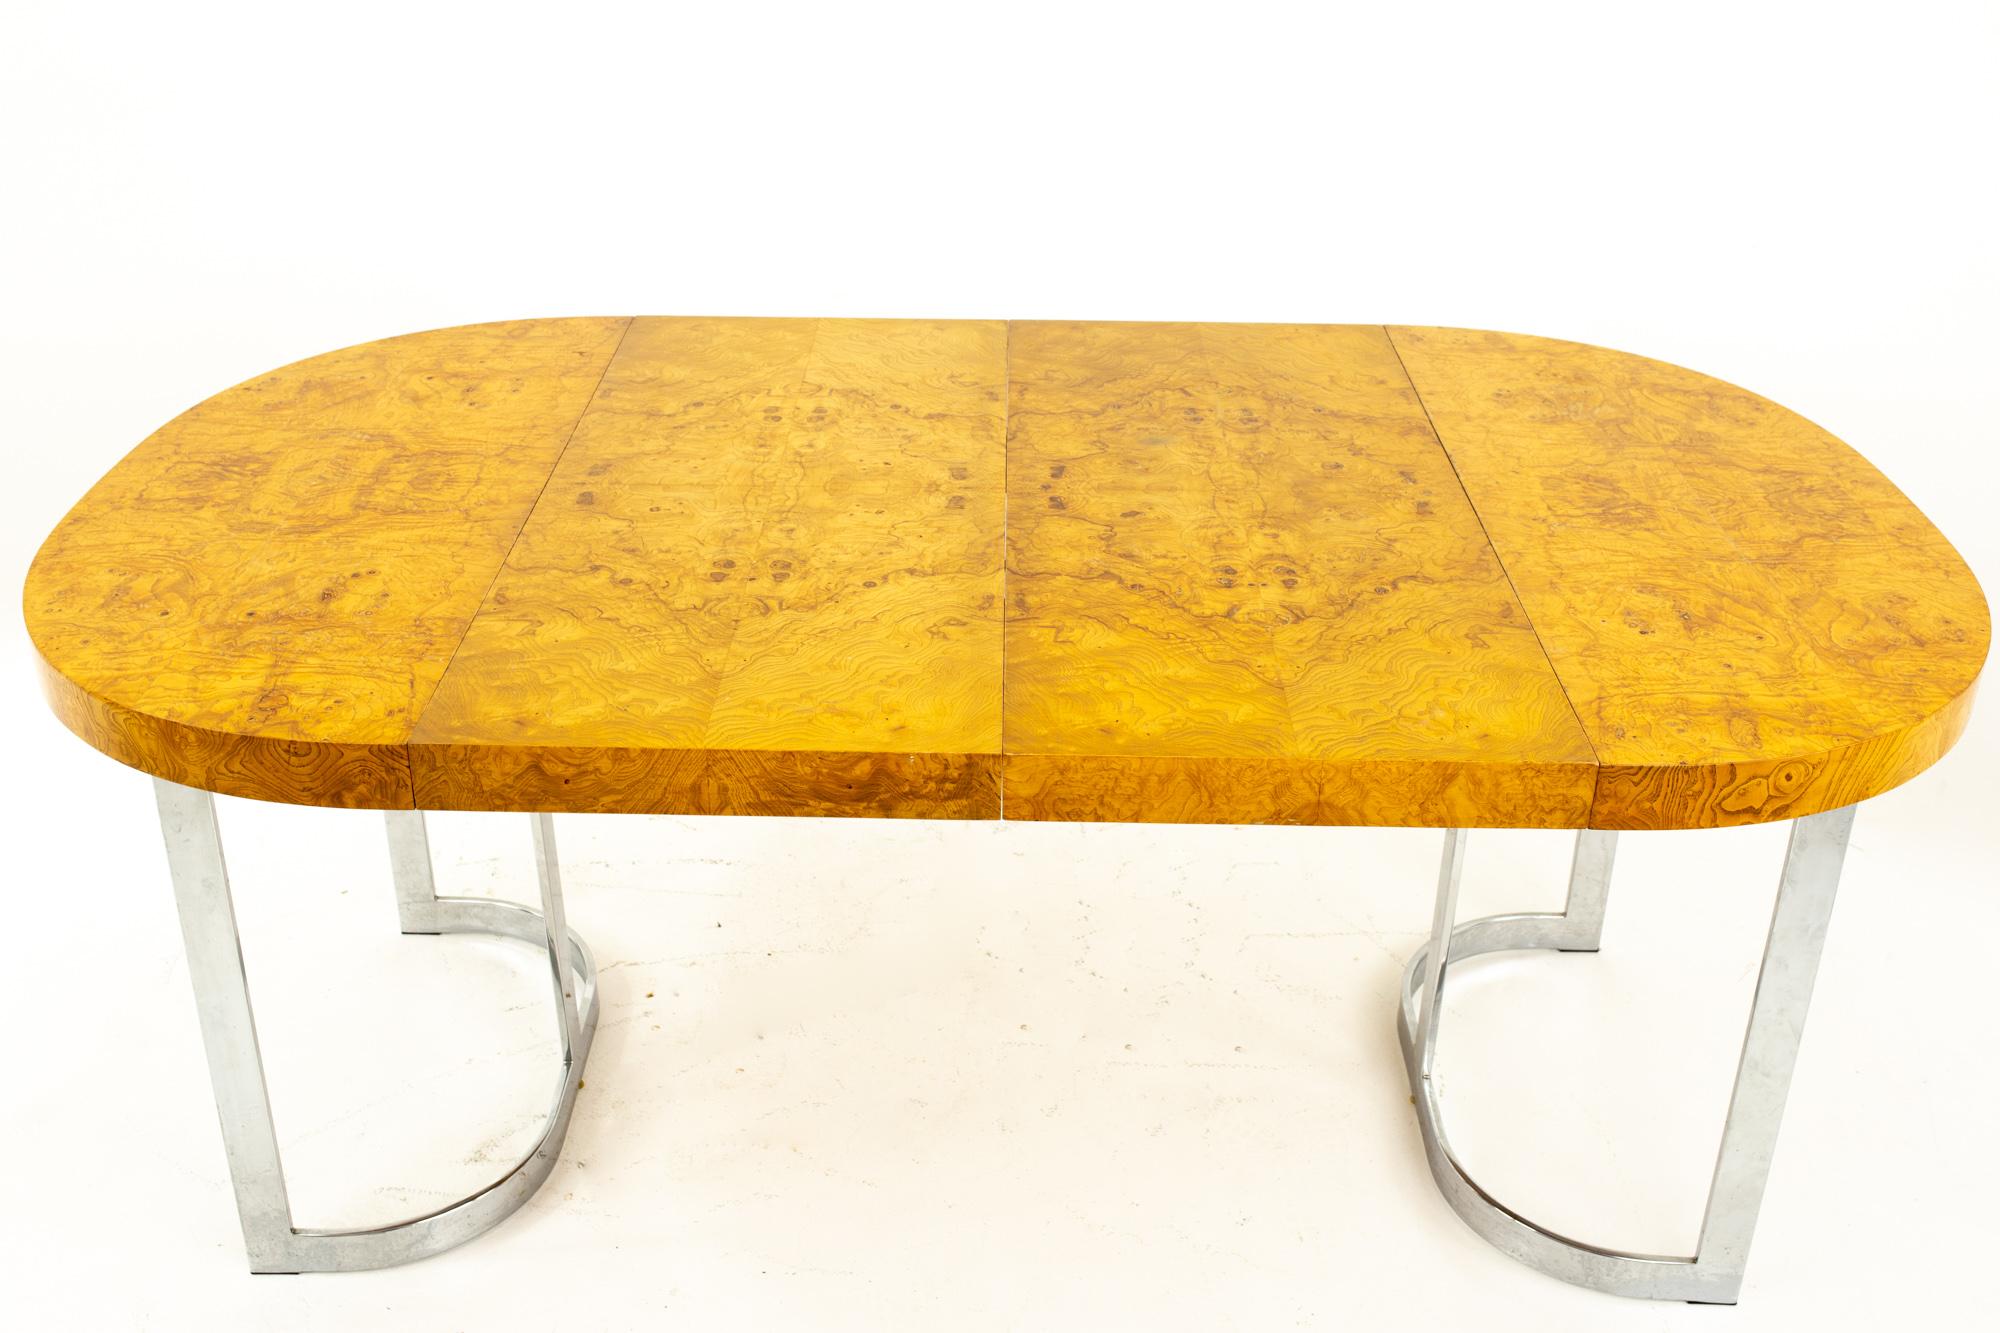 Milo Baughman Style midcentury burl wood and chrome dining table
Table with no leaves measures: 36 wide x 42 deep x 29.5 high 
Table with two leaves measures: 72 wide x 42 deep x 29.5 high 

All pieces of furniture can be had in what we call